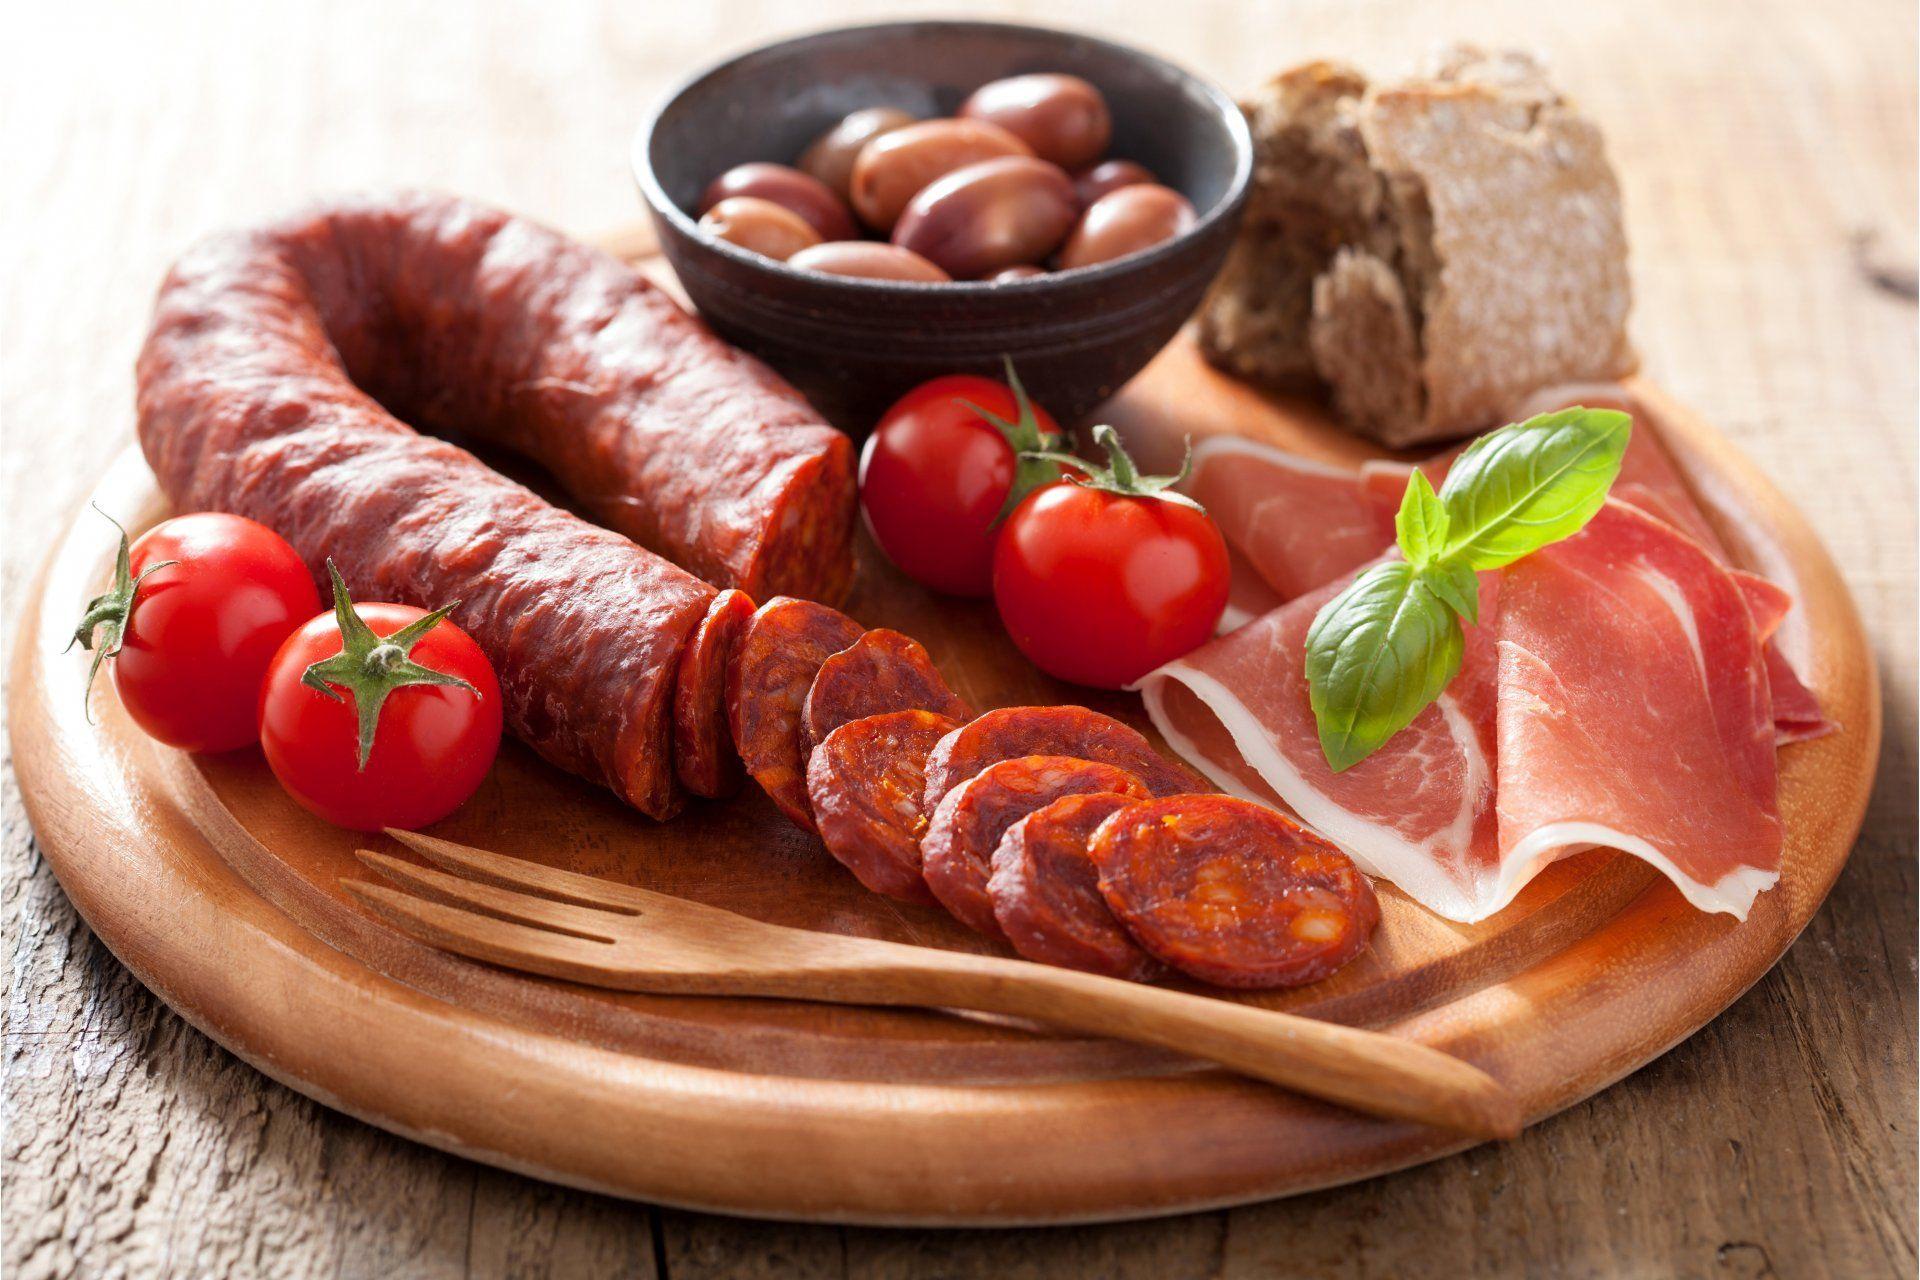 meat products sausage ham tomatoes food photo HD wallpaper